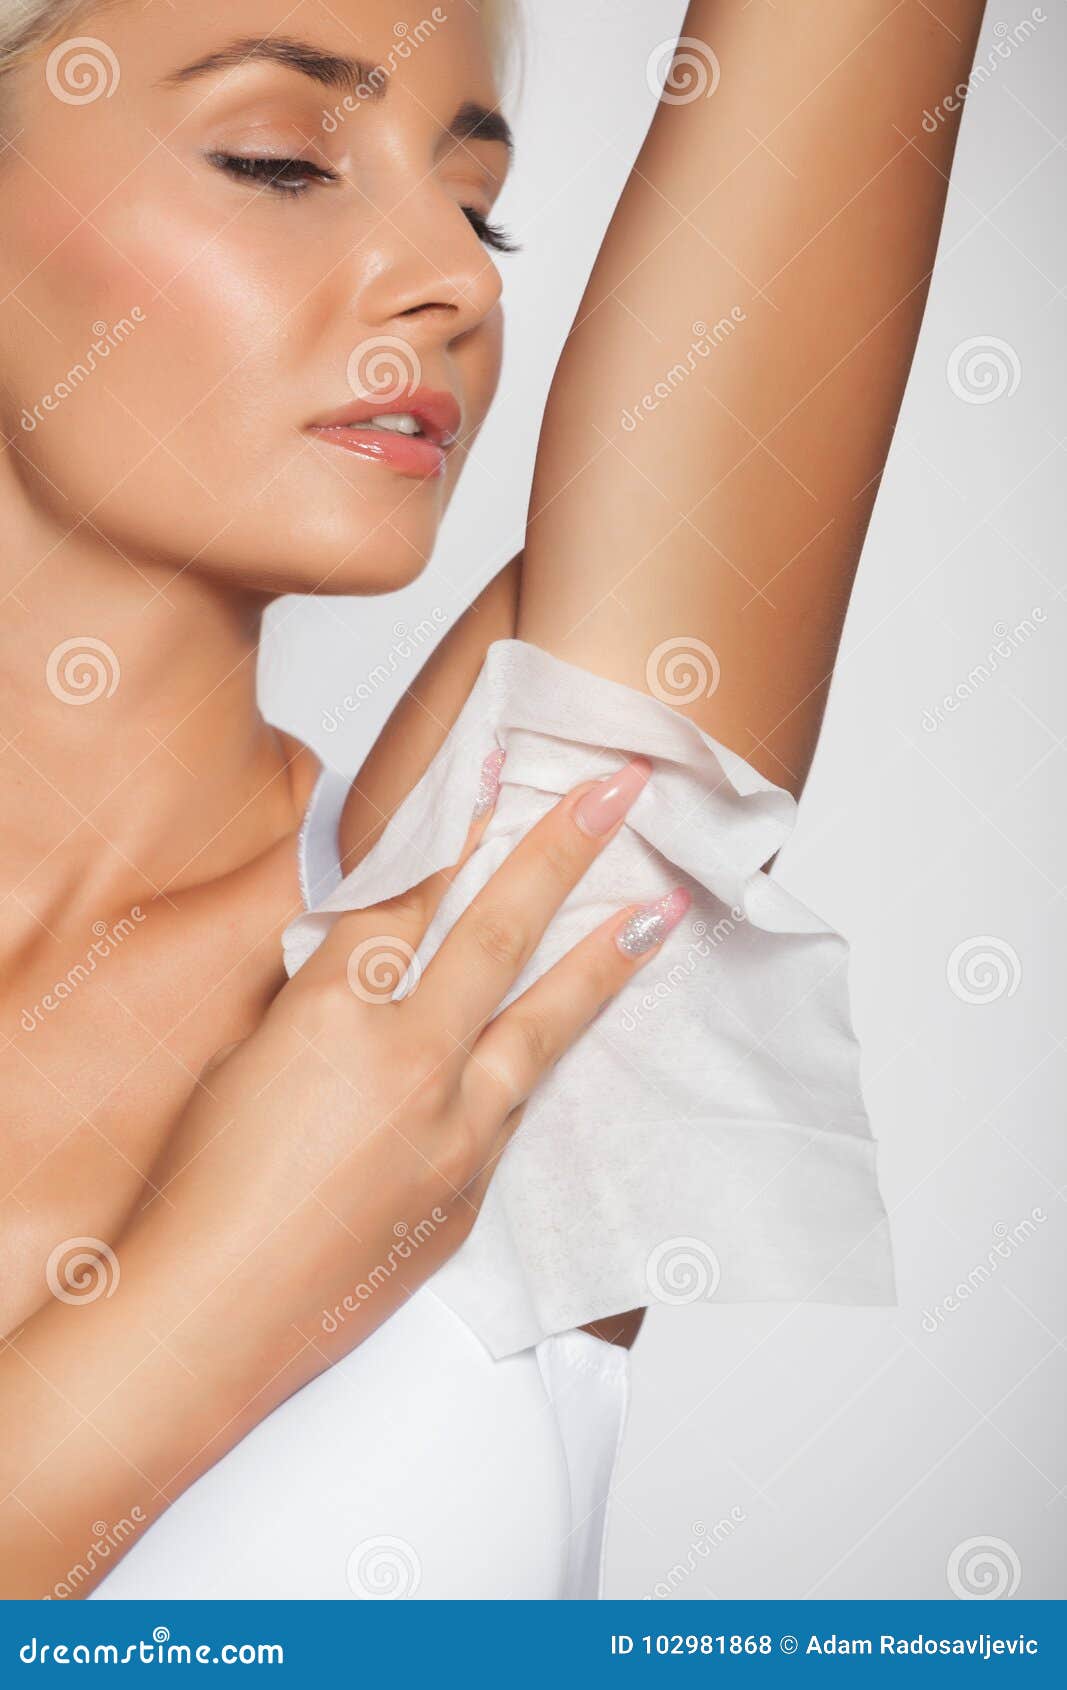 woman clean the armpit with wet wipes